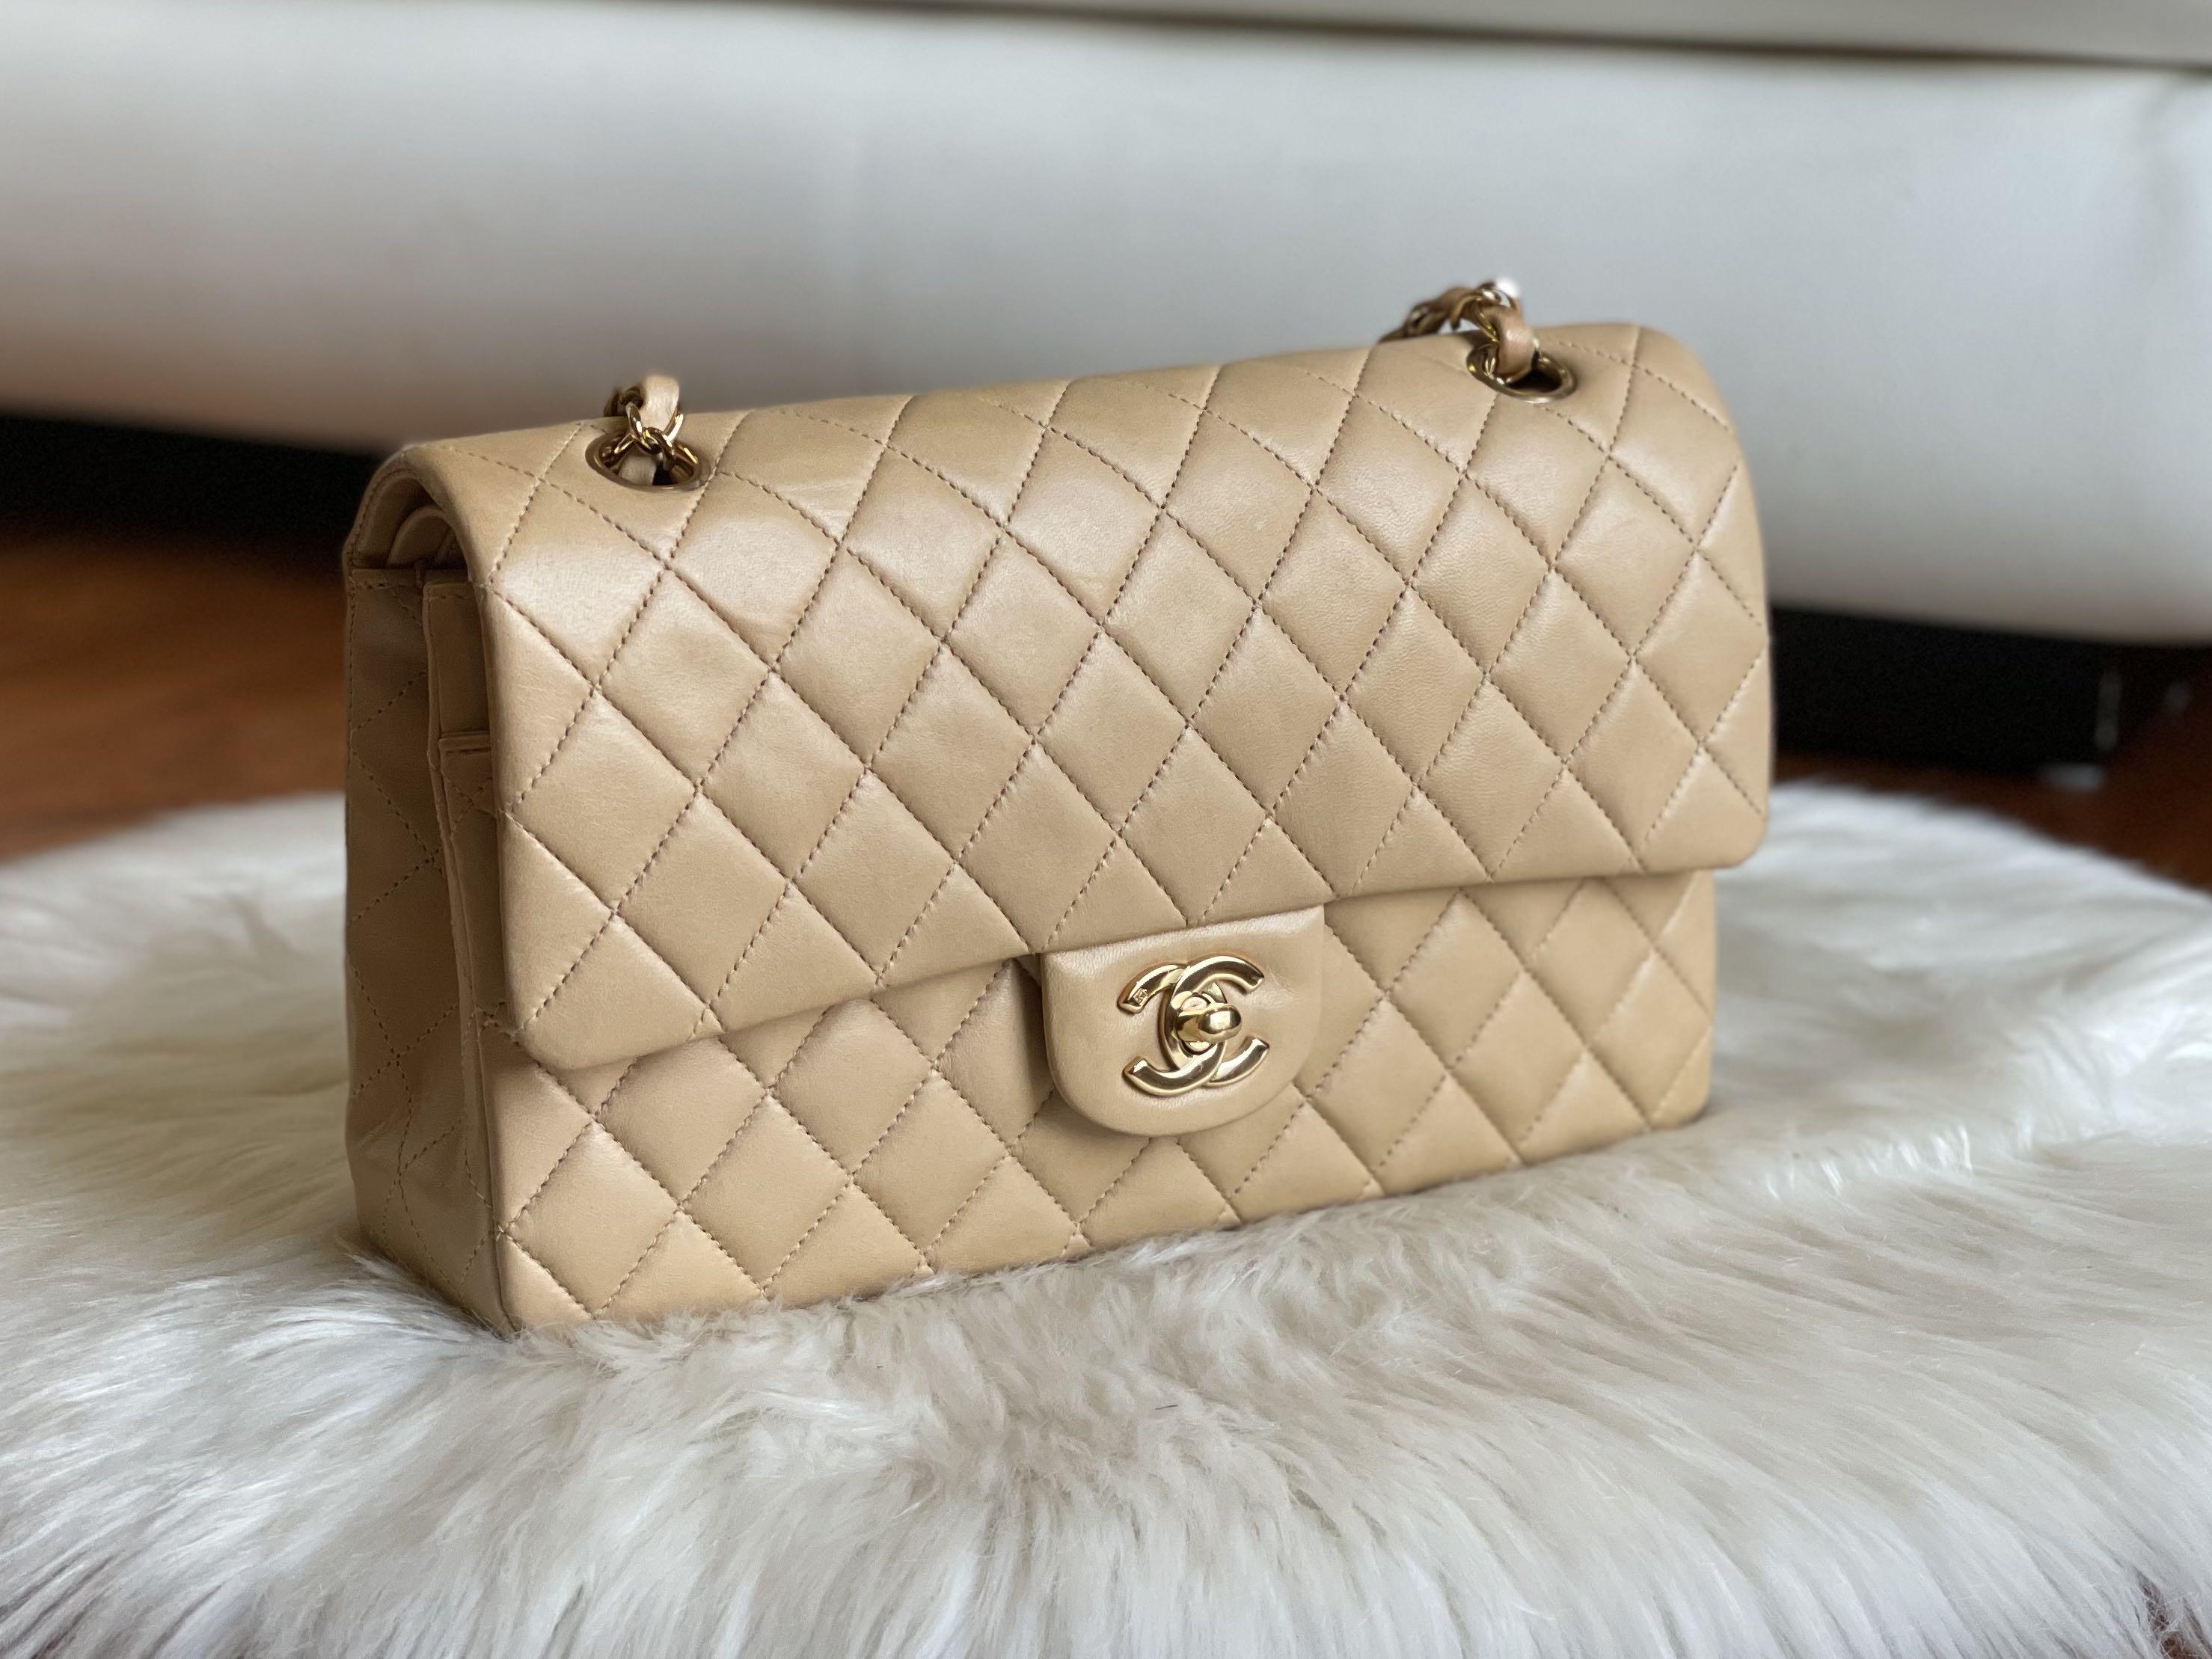 Chanel Medium Diana Flap, Distressed Patent Leather, Beige GHW